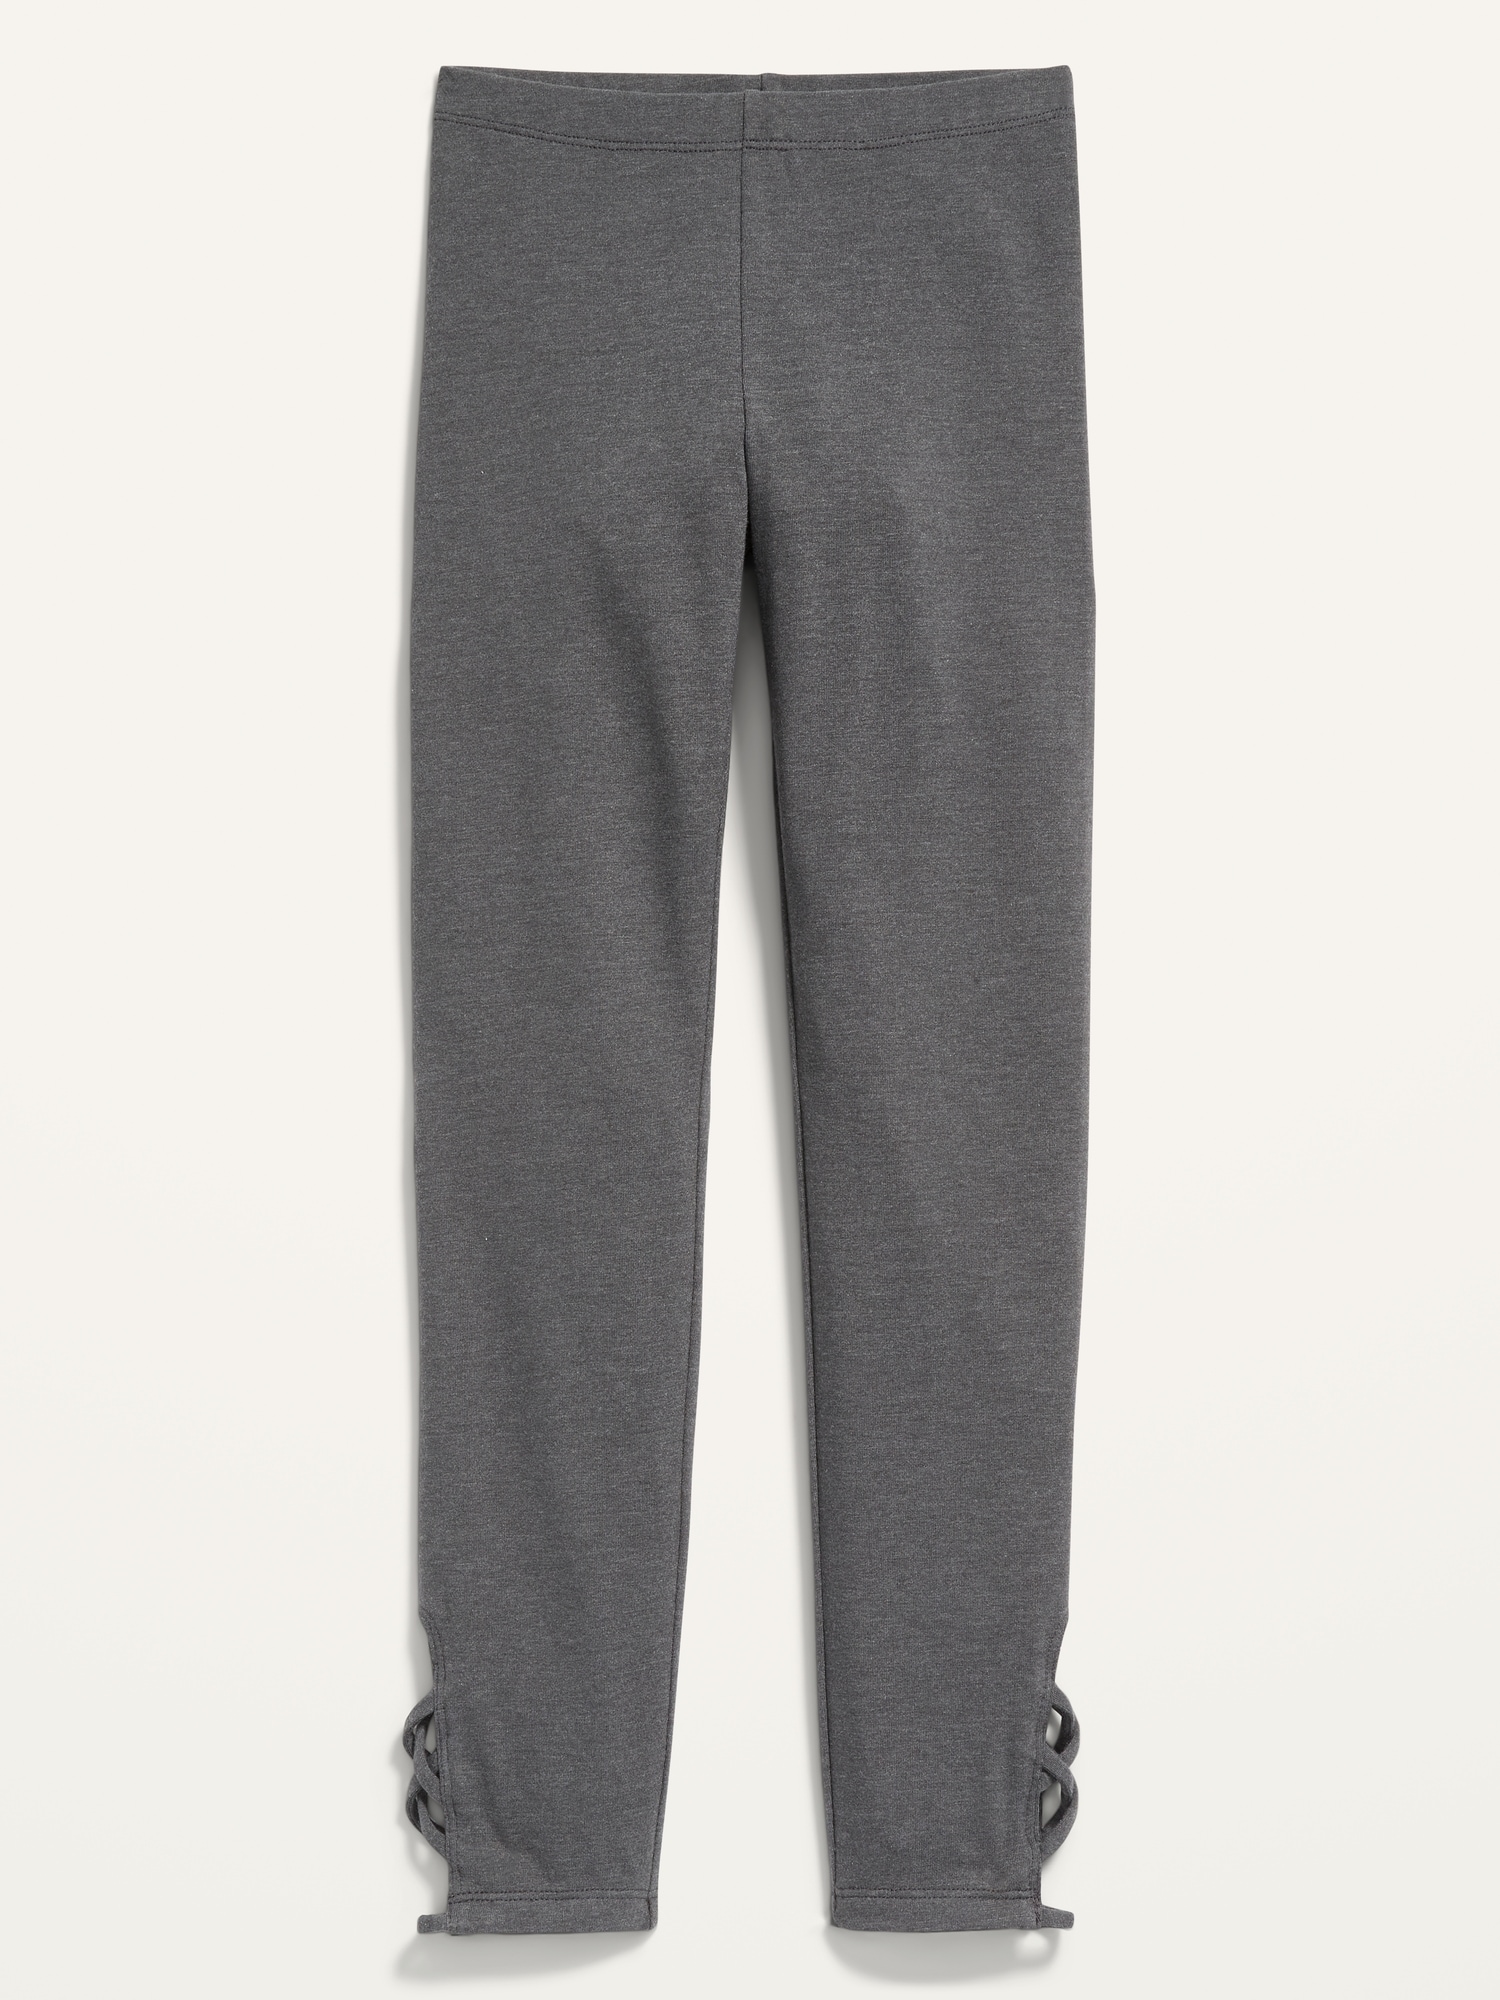 Old Navy Grey Full Length Pants Active Women's Size M – The Kids